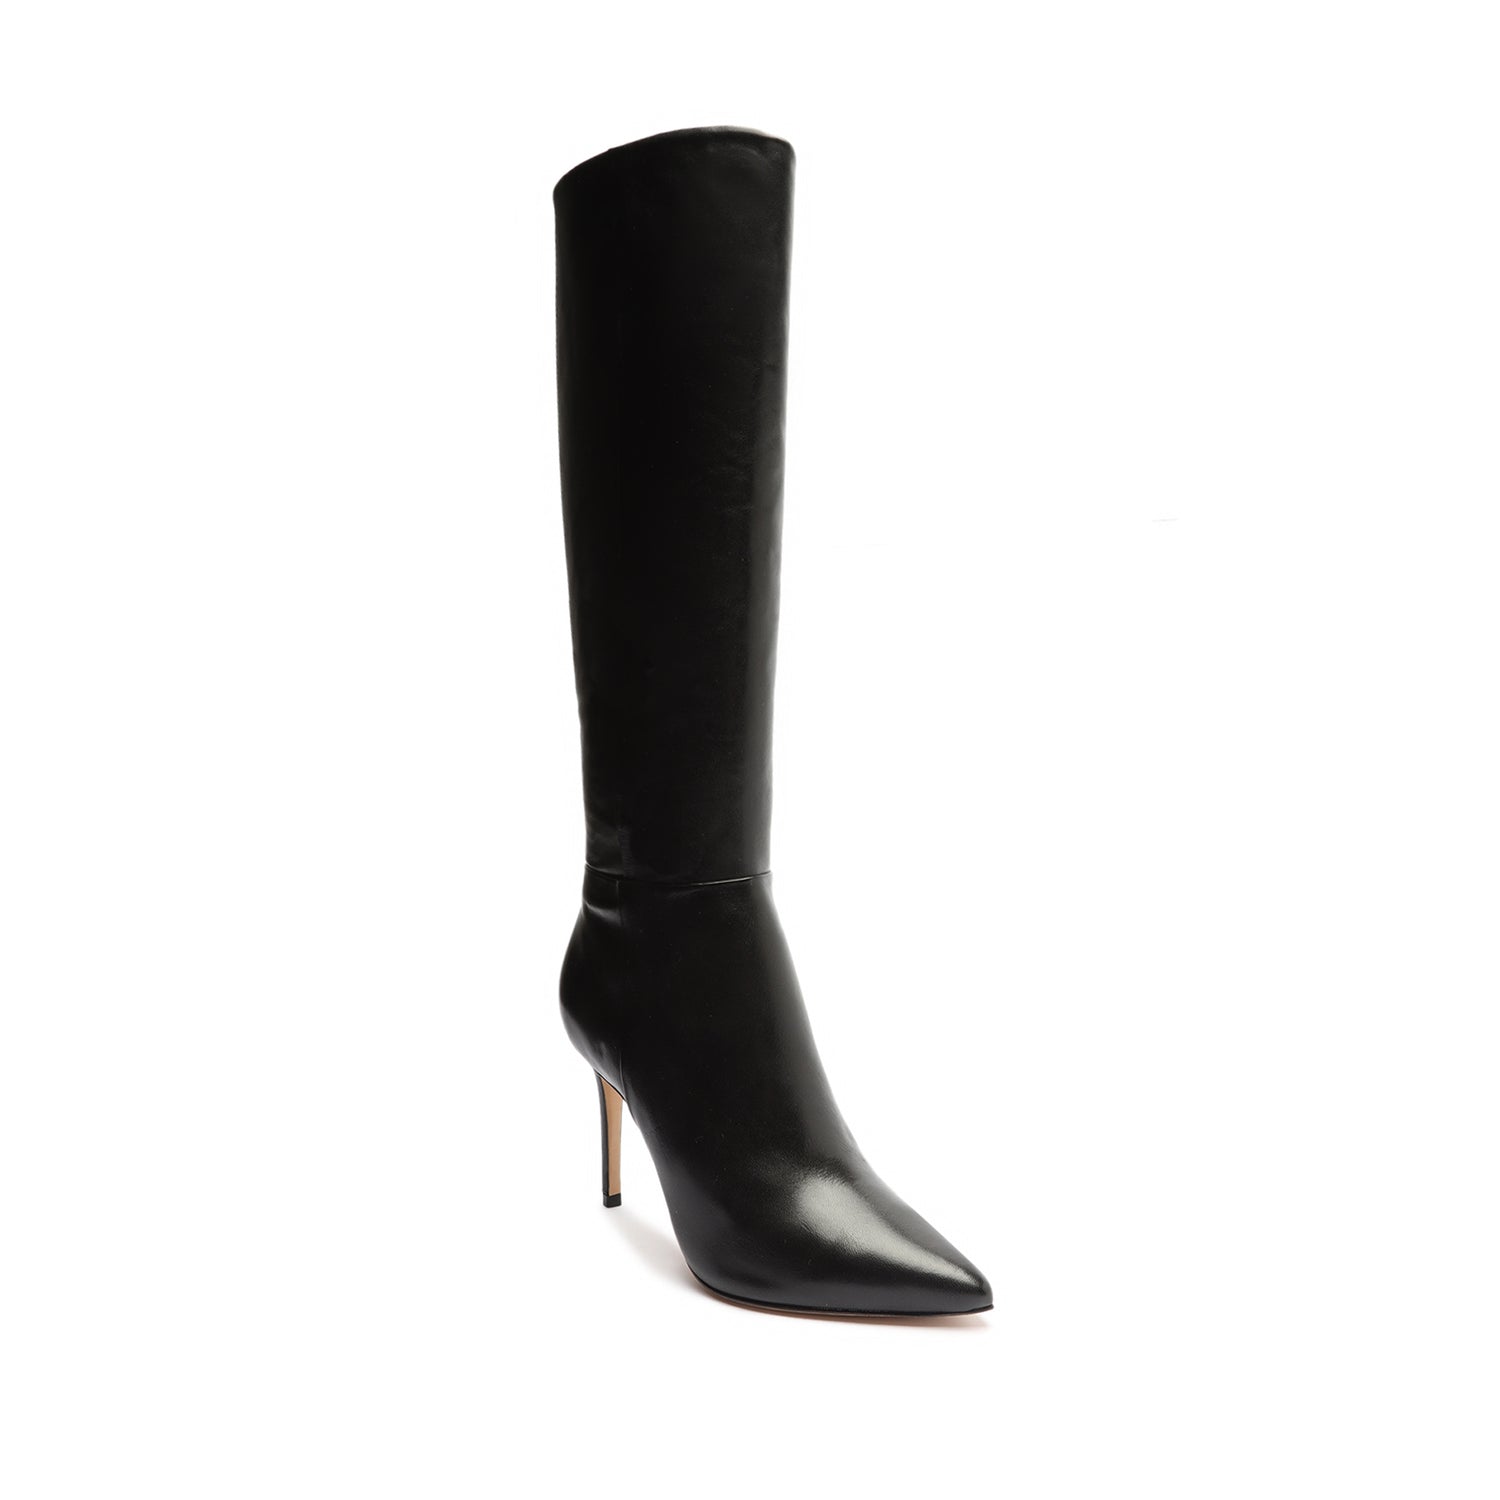 Knee-high Boots - Red - Ladies | H&M US